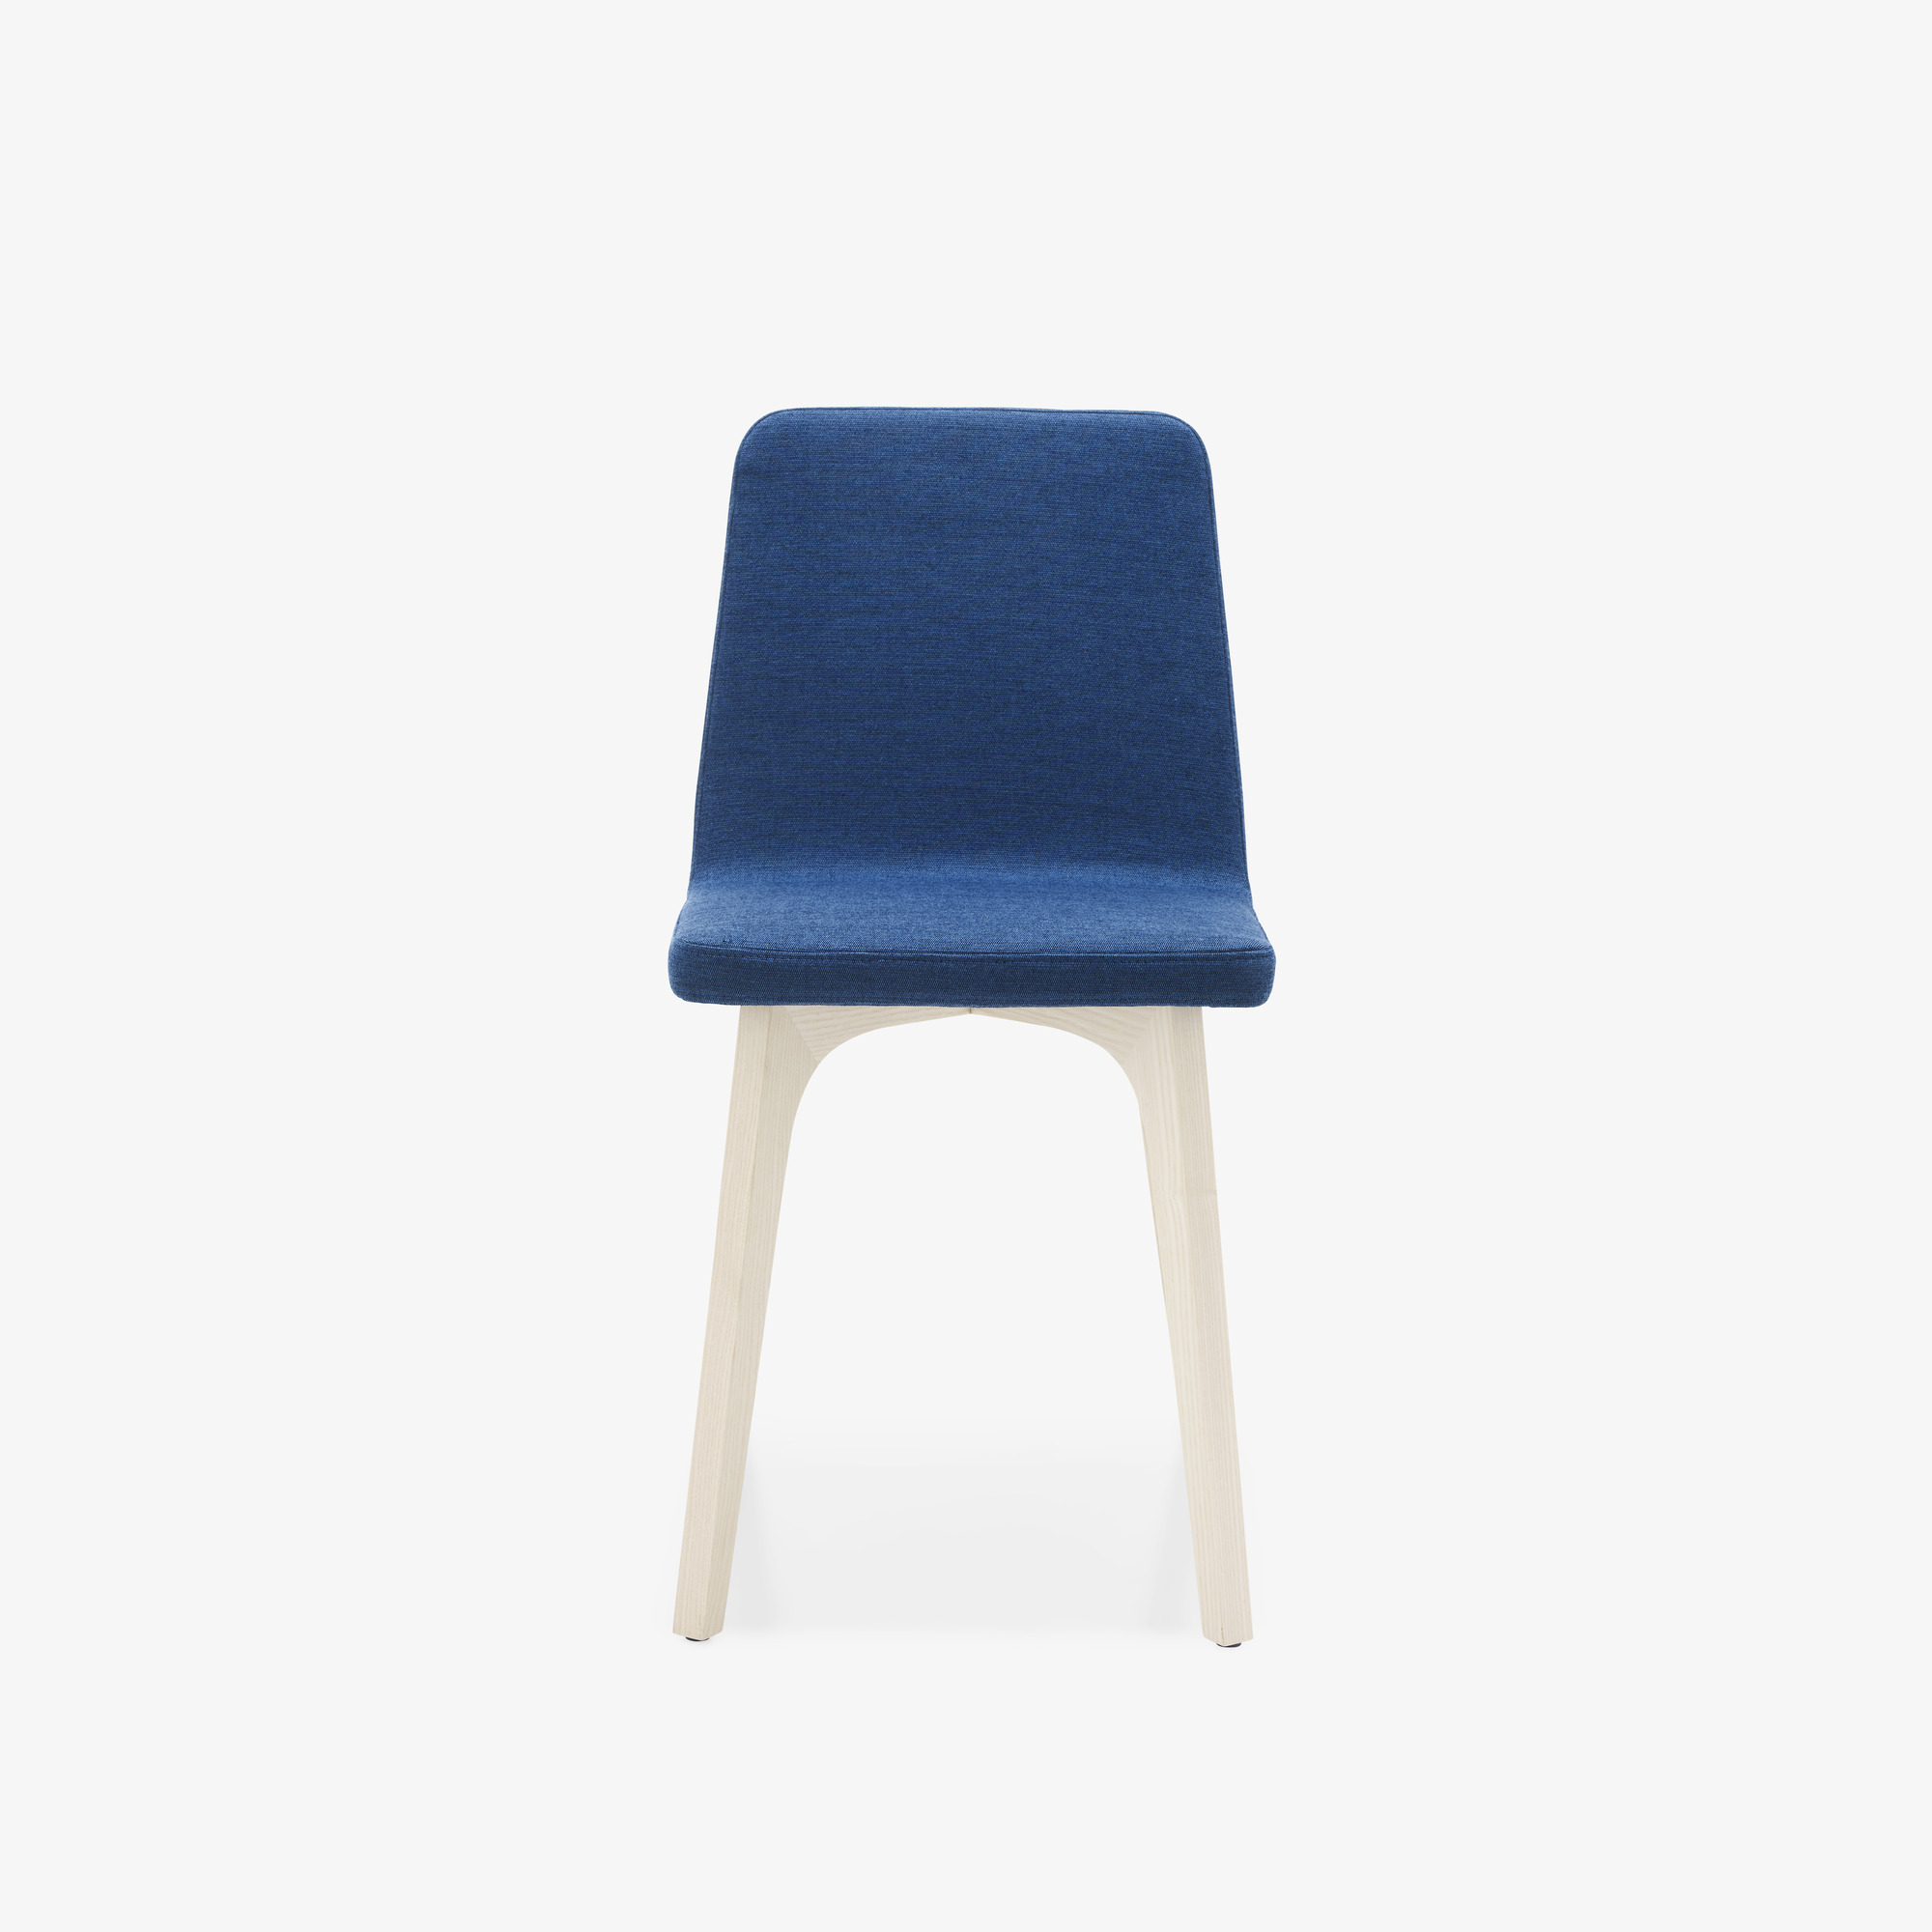 Image Chair wooden base 4